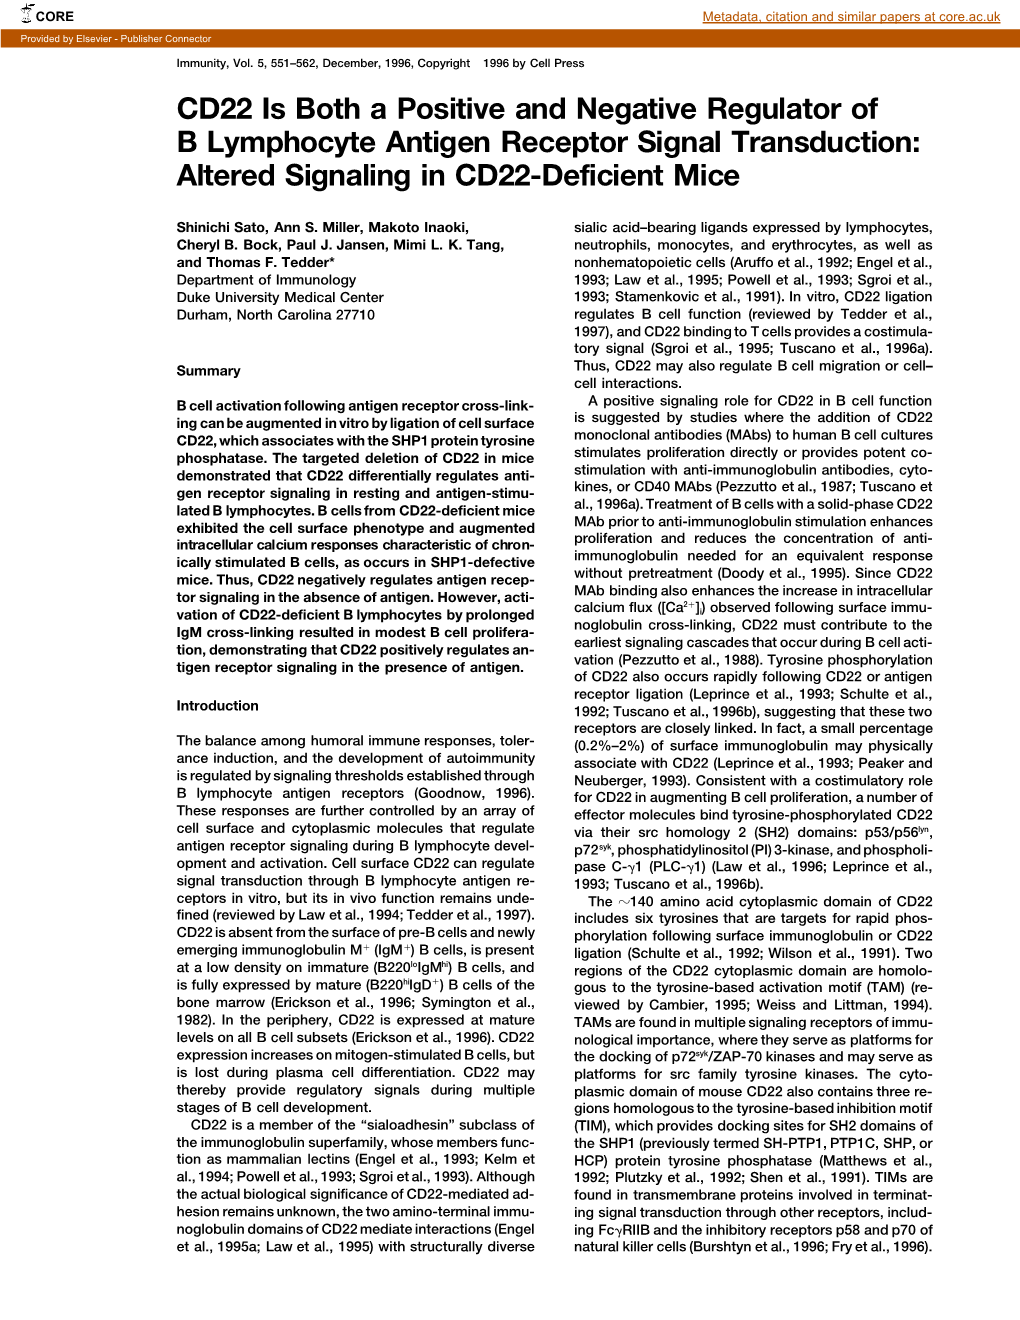 CD22 Is Both a Positive and Negative Regulator of B Lymphocyte Antigen Receptor Signal Transduction: Altered Signaling in CD22-Deficient Mice